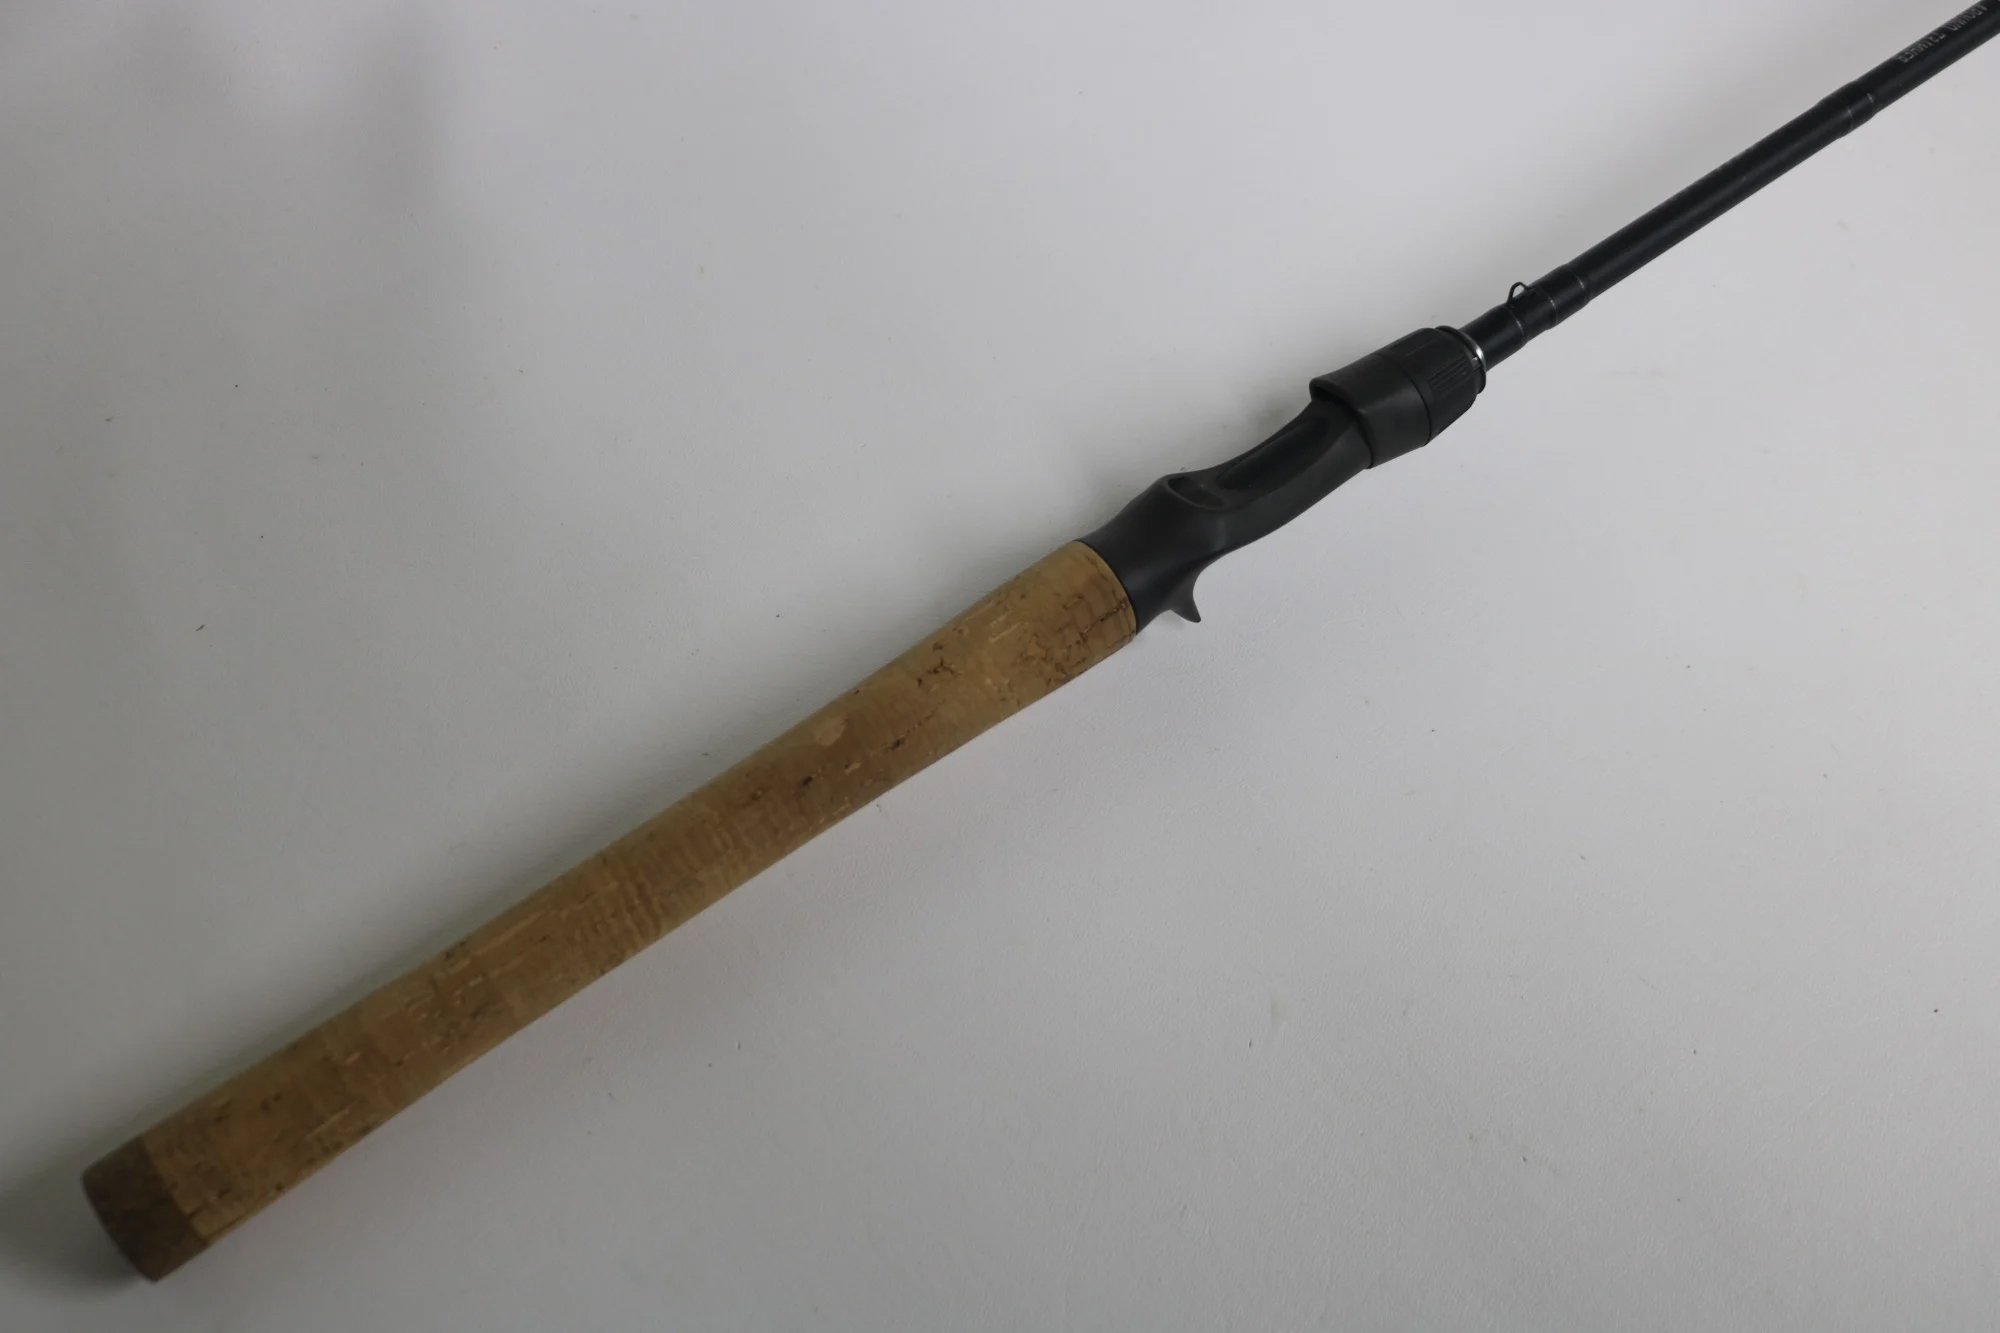 Daiwa Kage KAG731MHFB 7'3 Medium Heavy - Used Casting Rod - Excellent  Condition - American Legacy Fishing, G Loomis Superstore